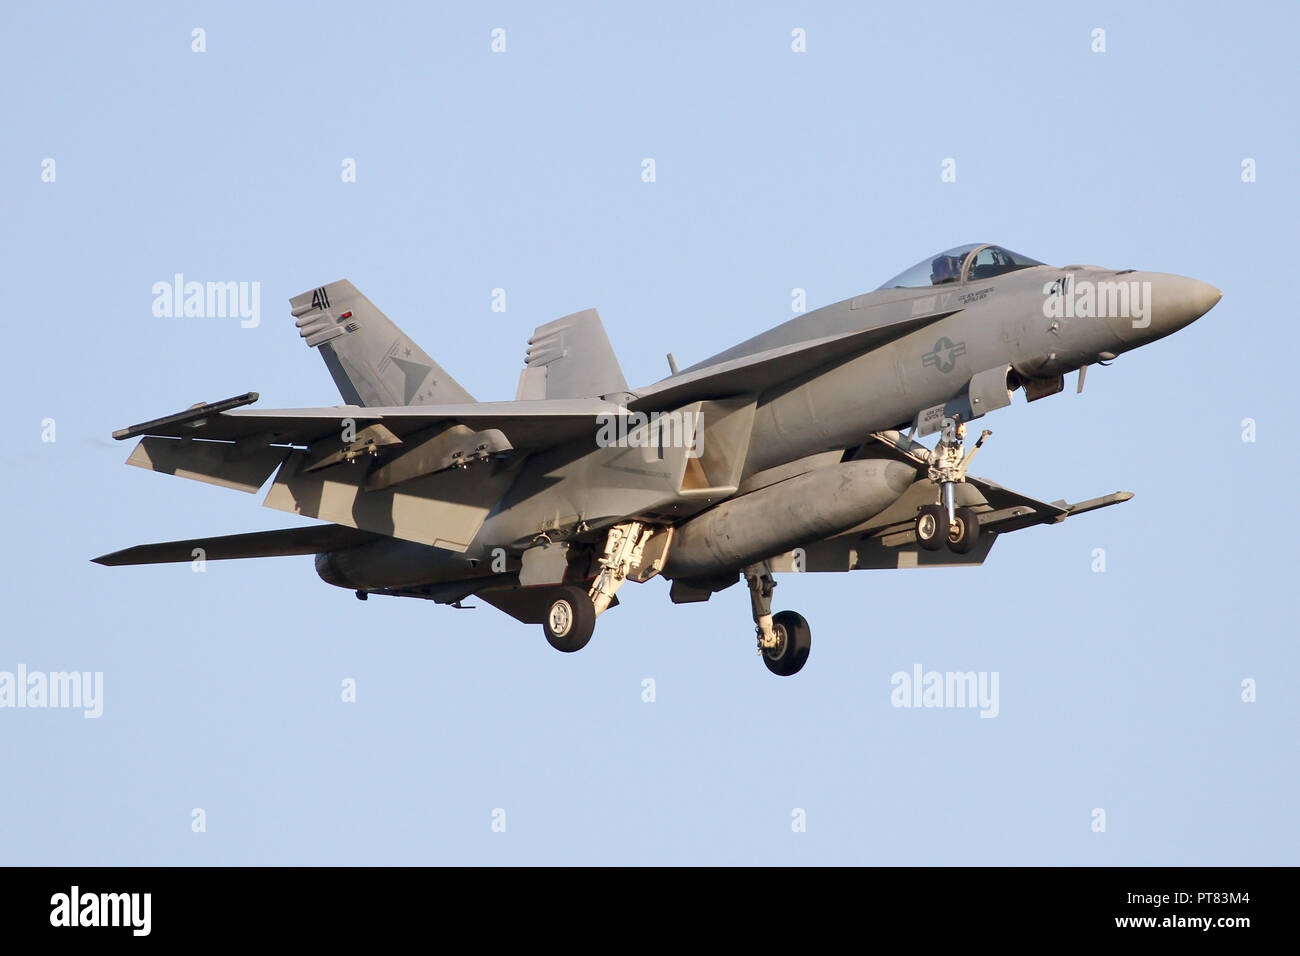 United States Navy F/A-18E Super Hornet on approach into RAF Lakenheath at dusk for a joint exercise with the USAF wing based here. Stock Photo